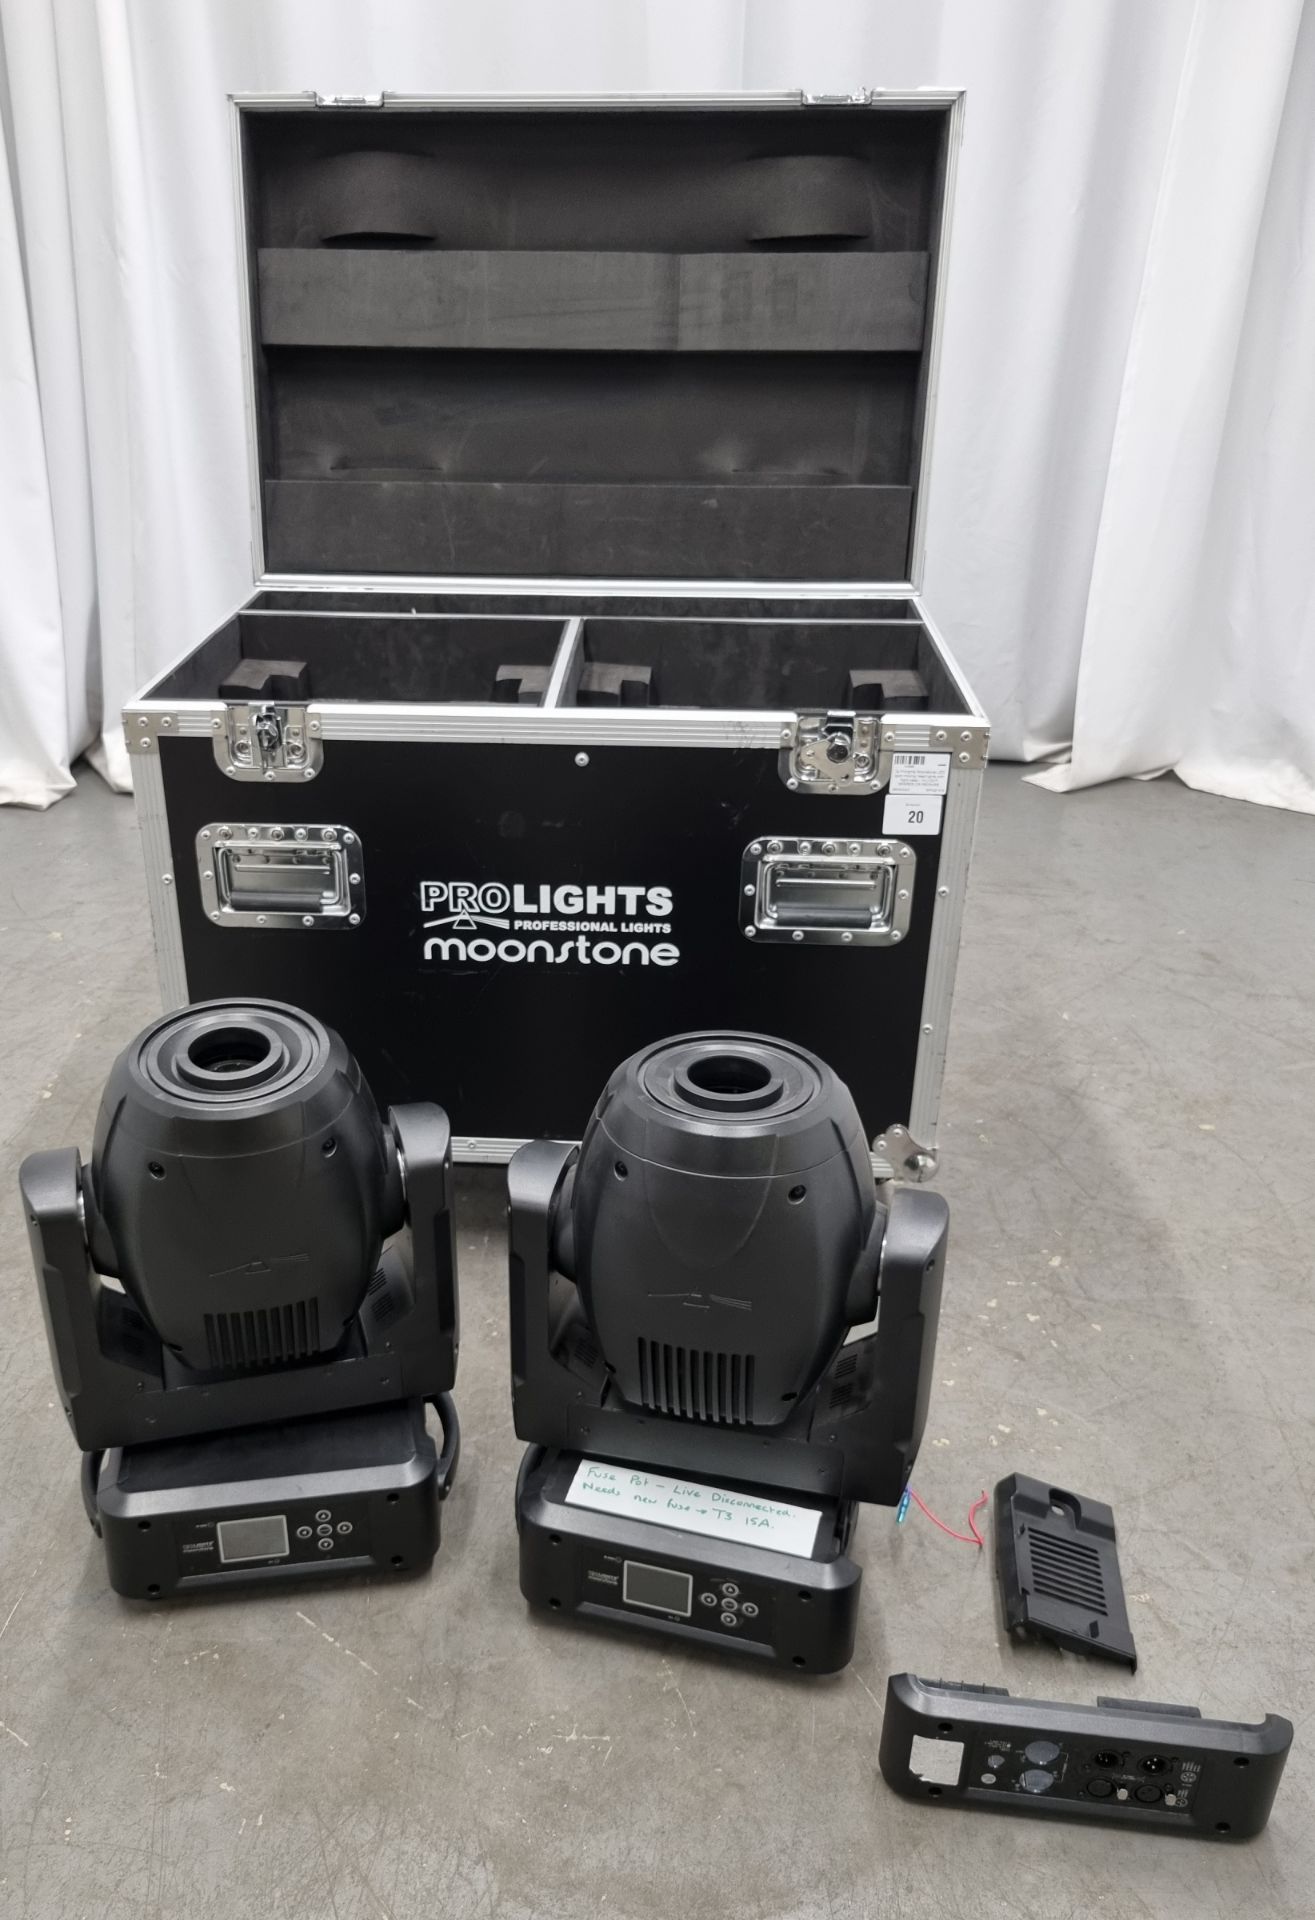 2x Prolights Moonstone LED spot moving head lights with flight case - 1x LIGHT SPARES OR REPAIRS